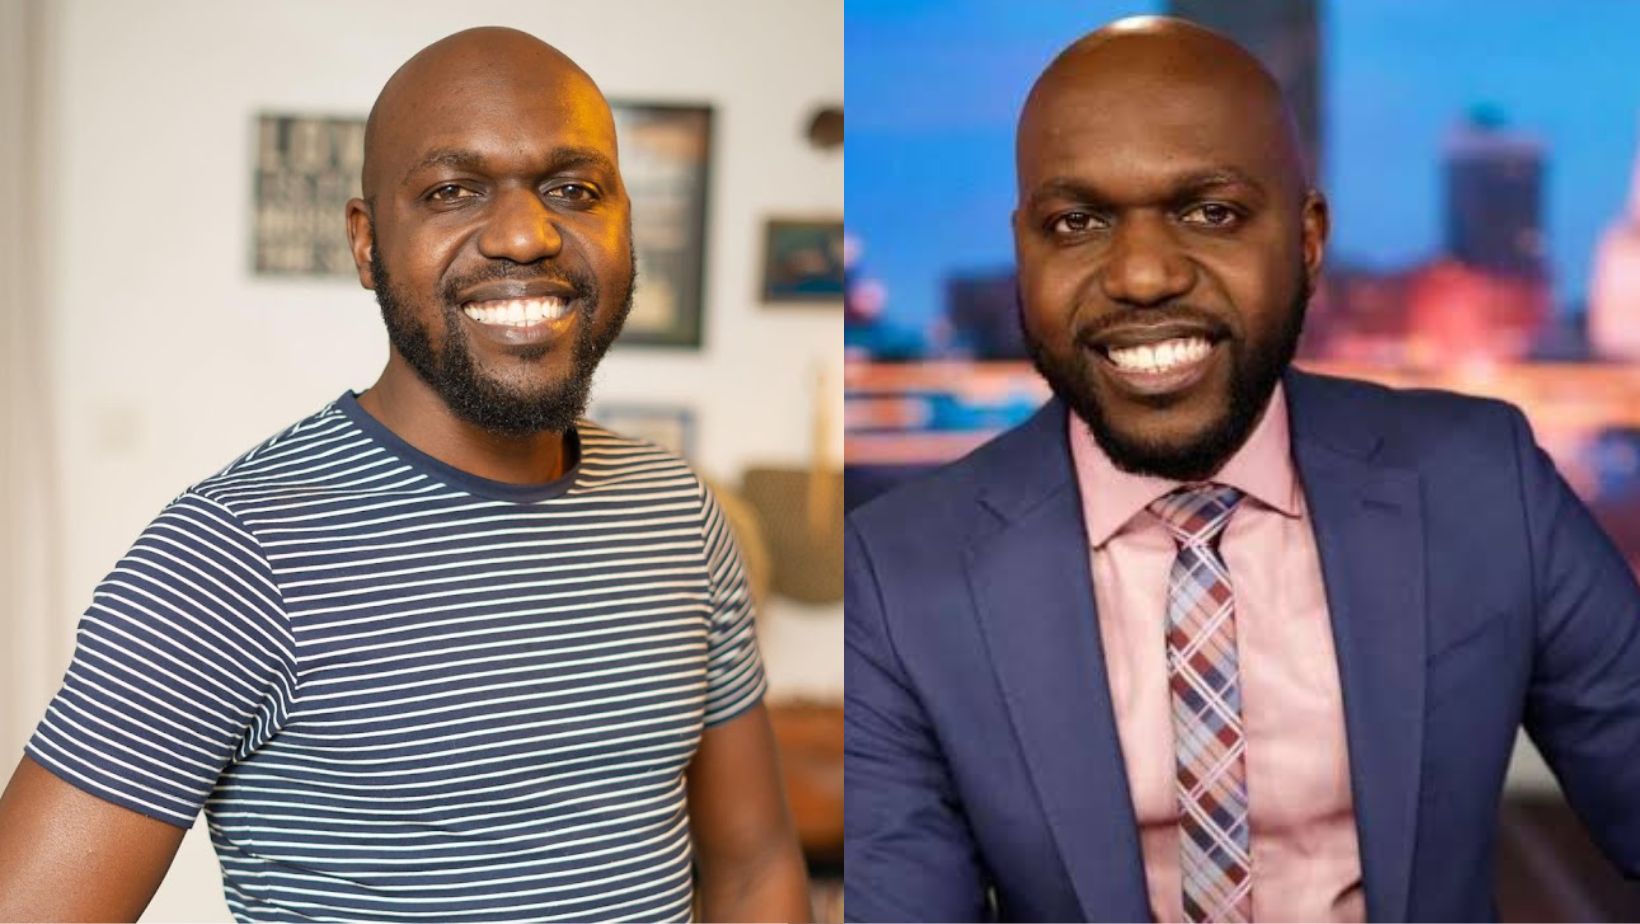 Larry Madowo Biography, Age, Wife, Child, Net Worth, Salary, Tribe, Education